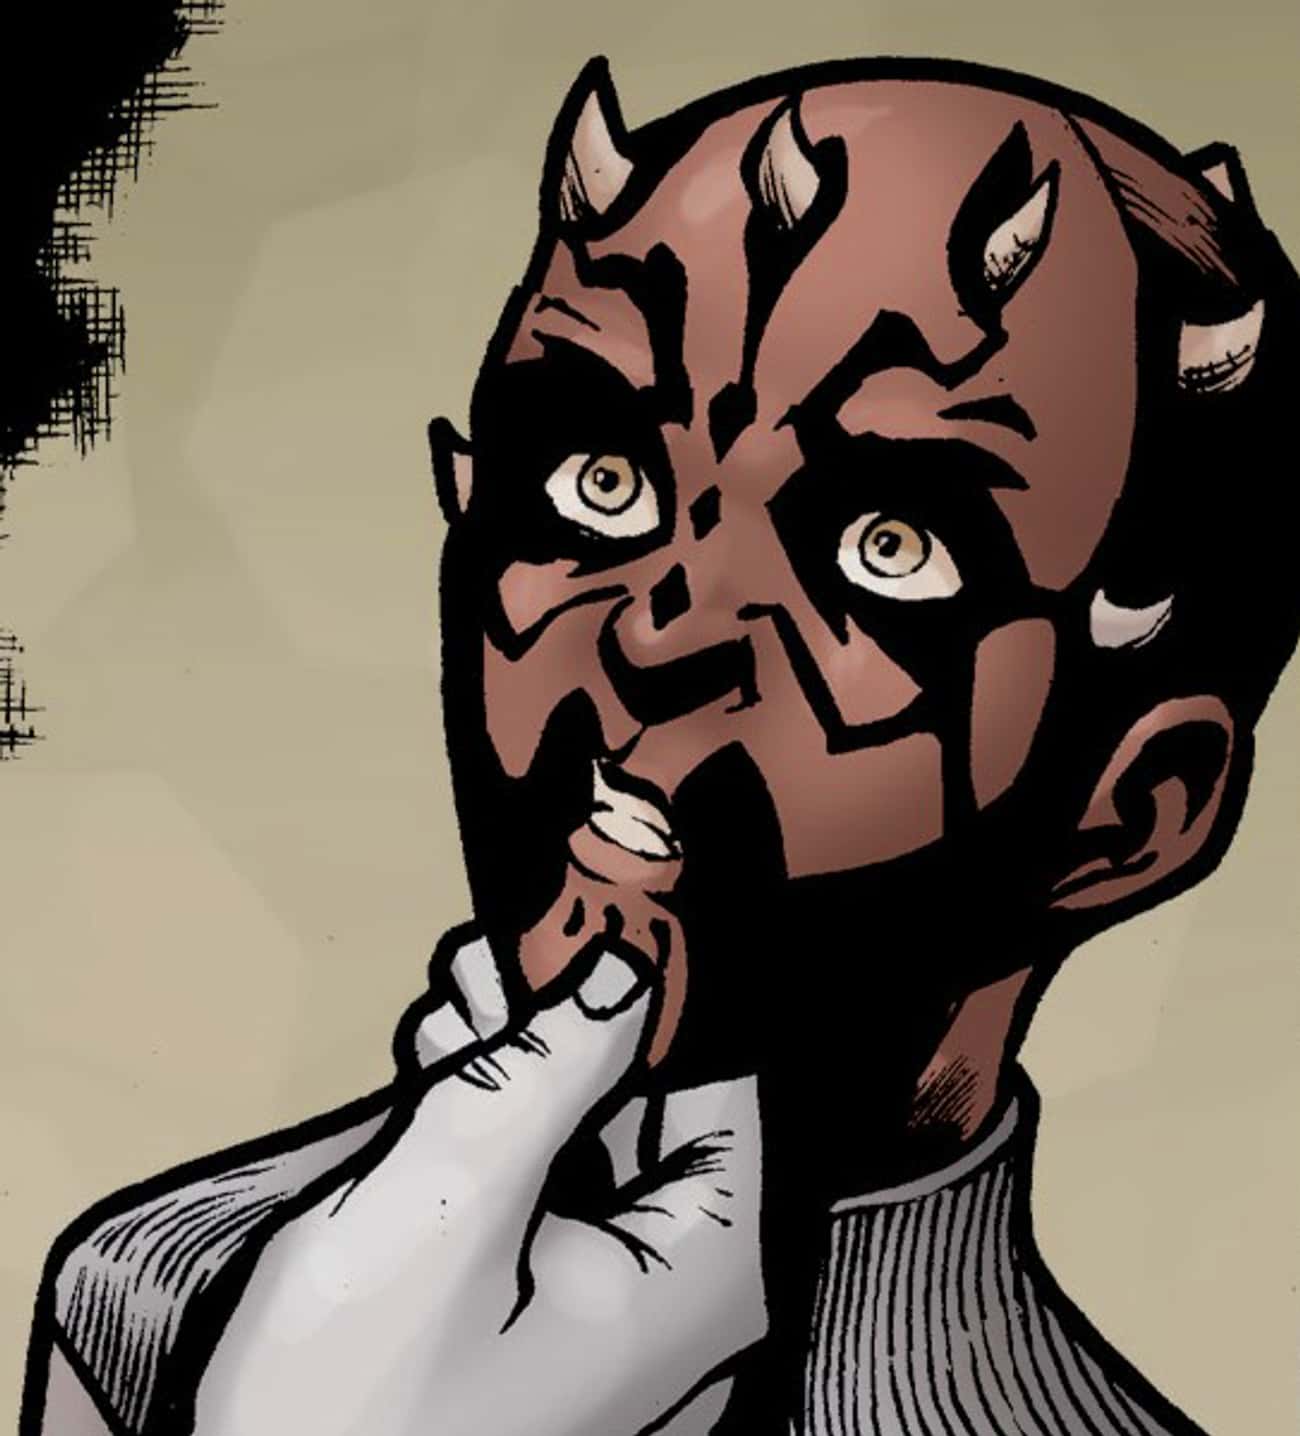 54 BBY: Maul Was Born Into The Life Of A Dathomirian Nightbrother